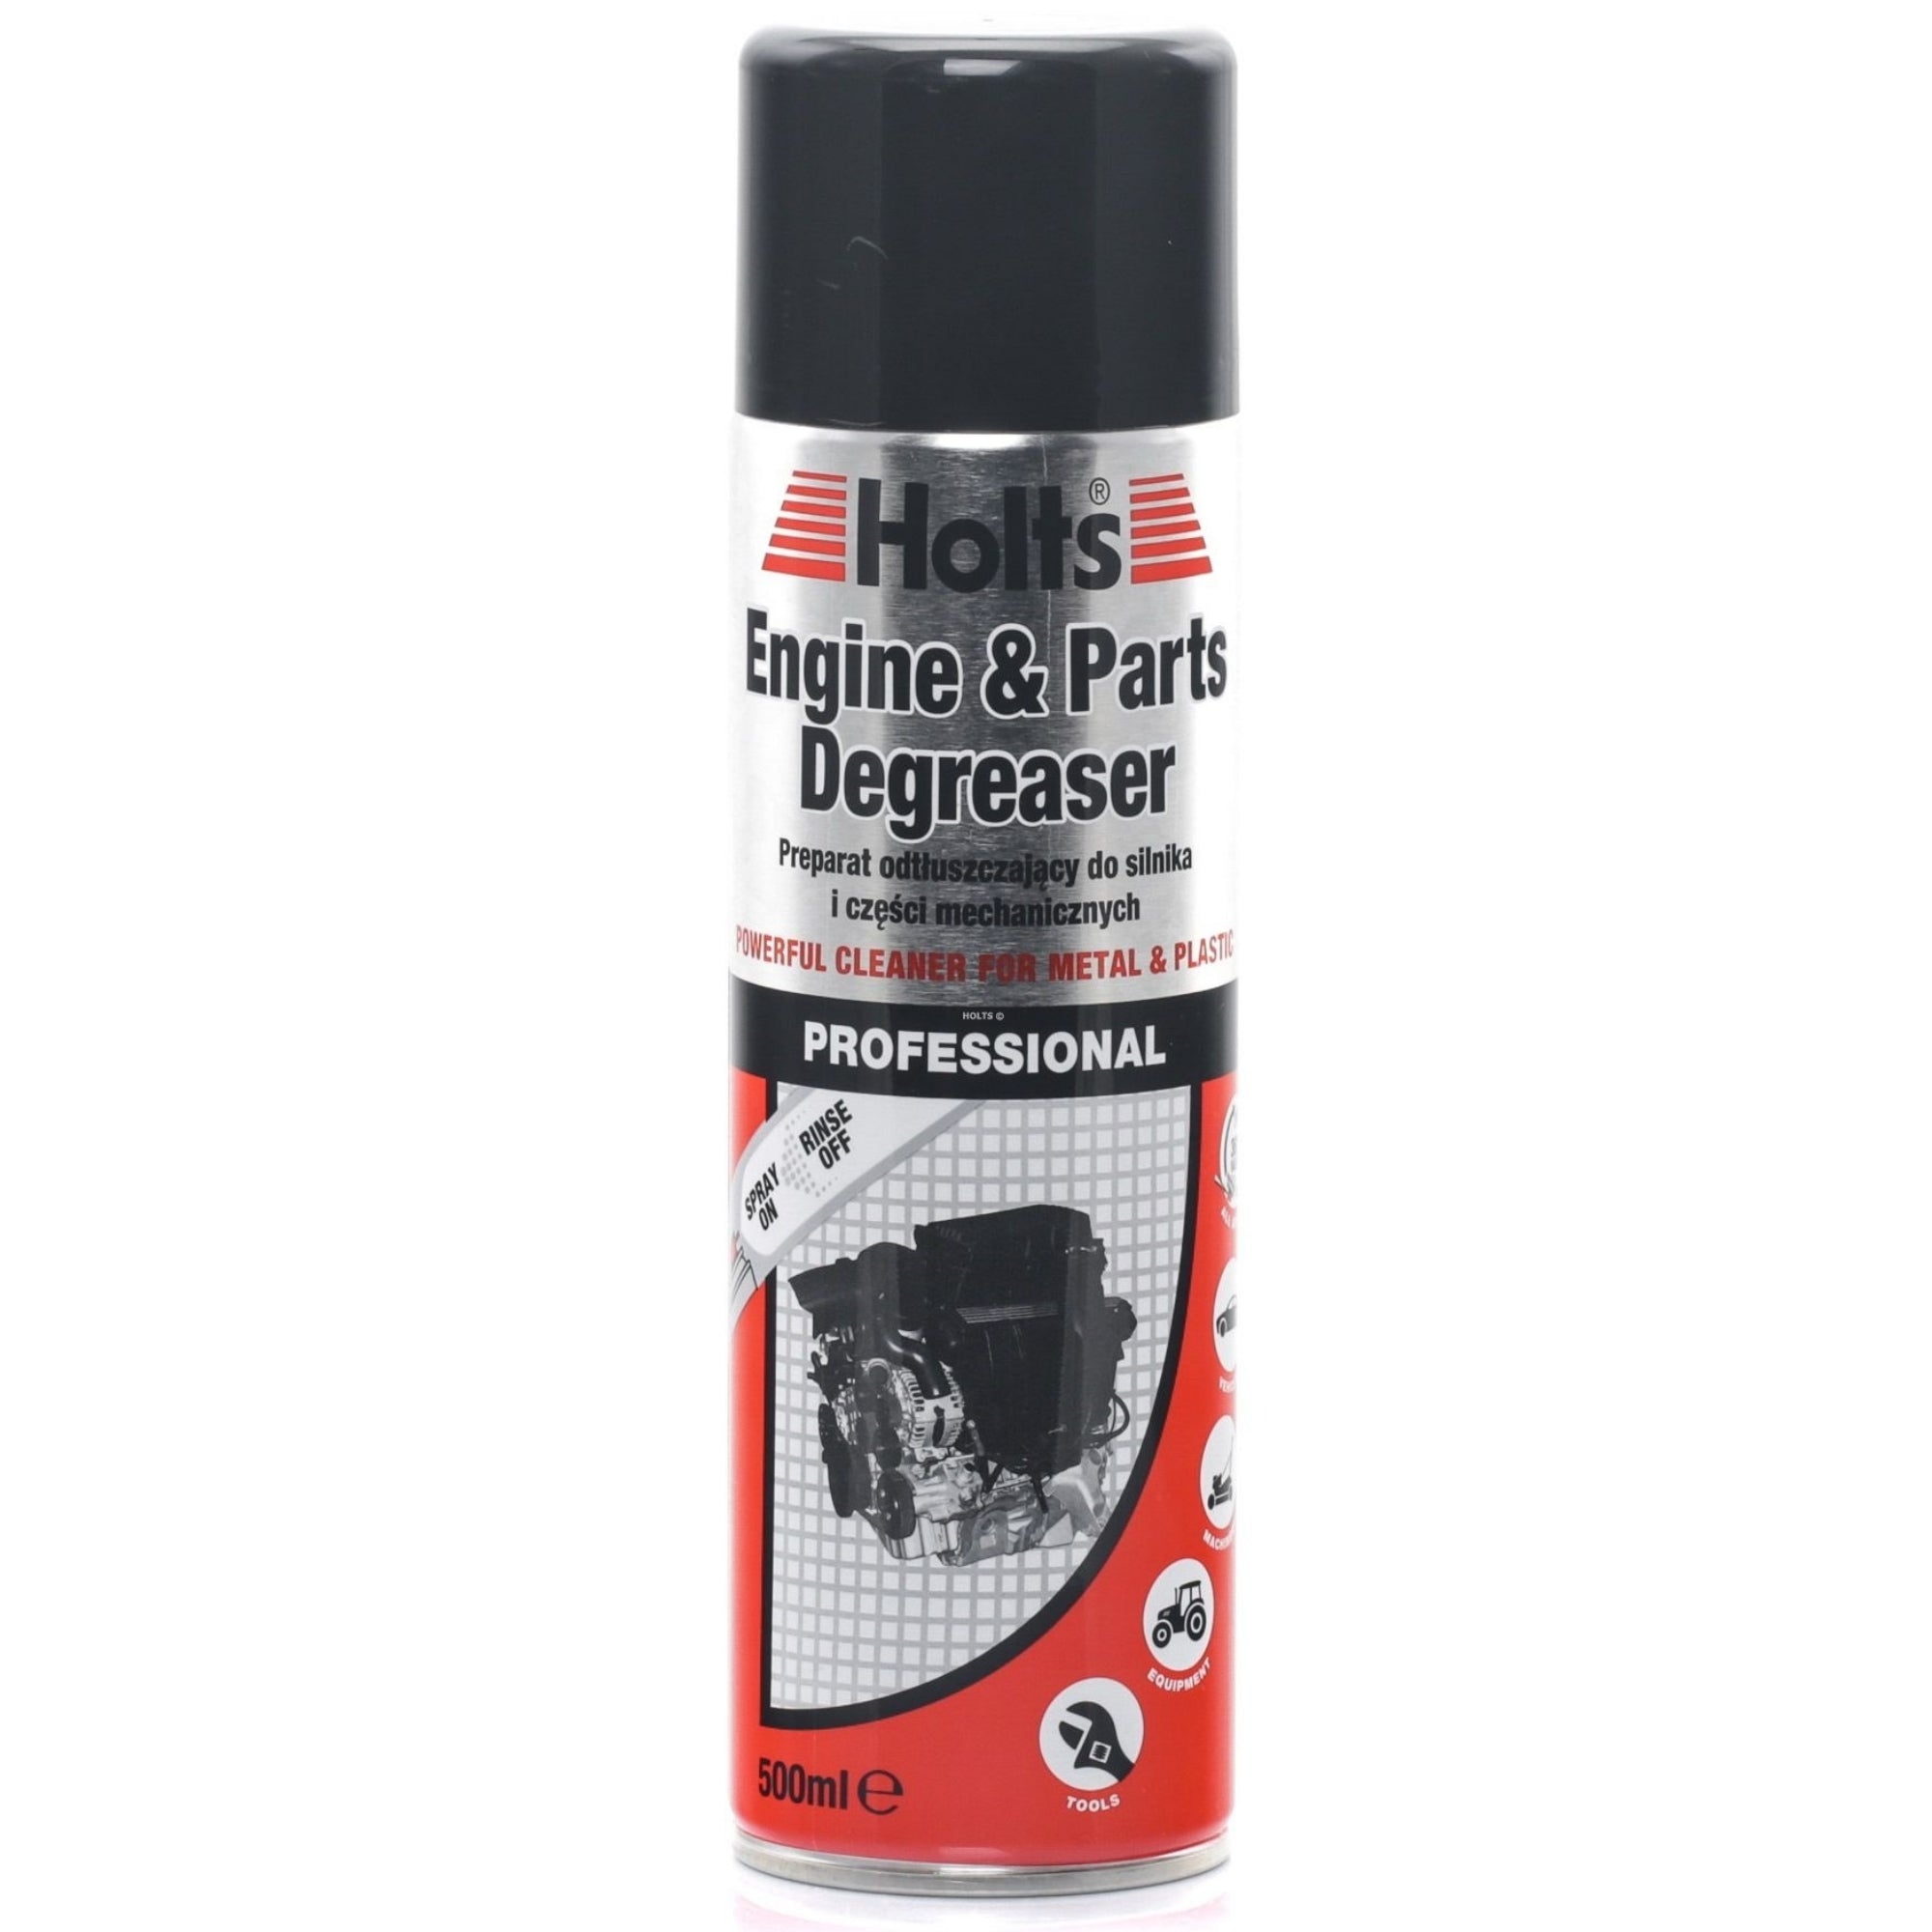 Holts Engine & Parts Degreaser 500ml